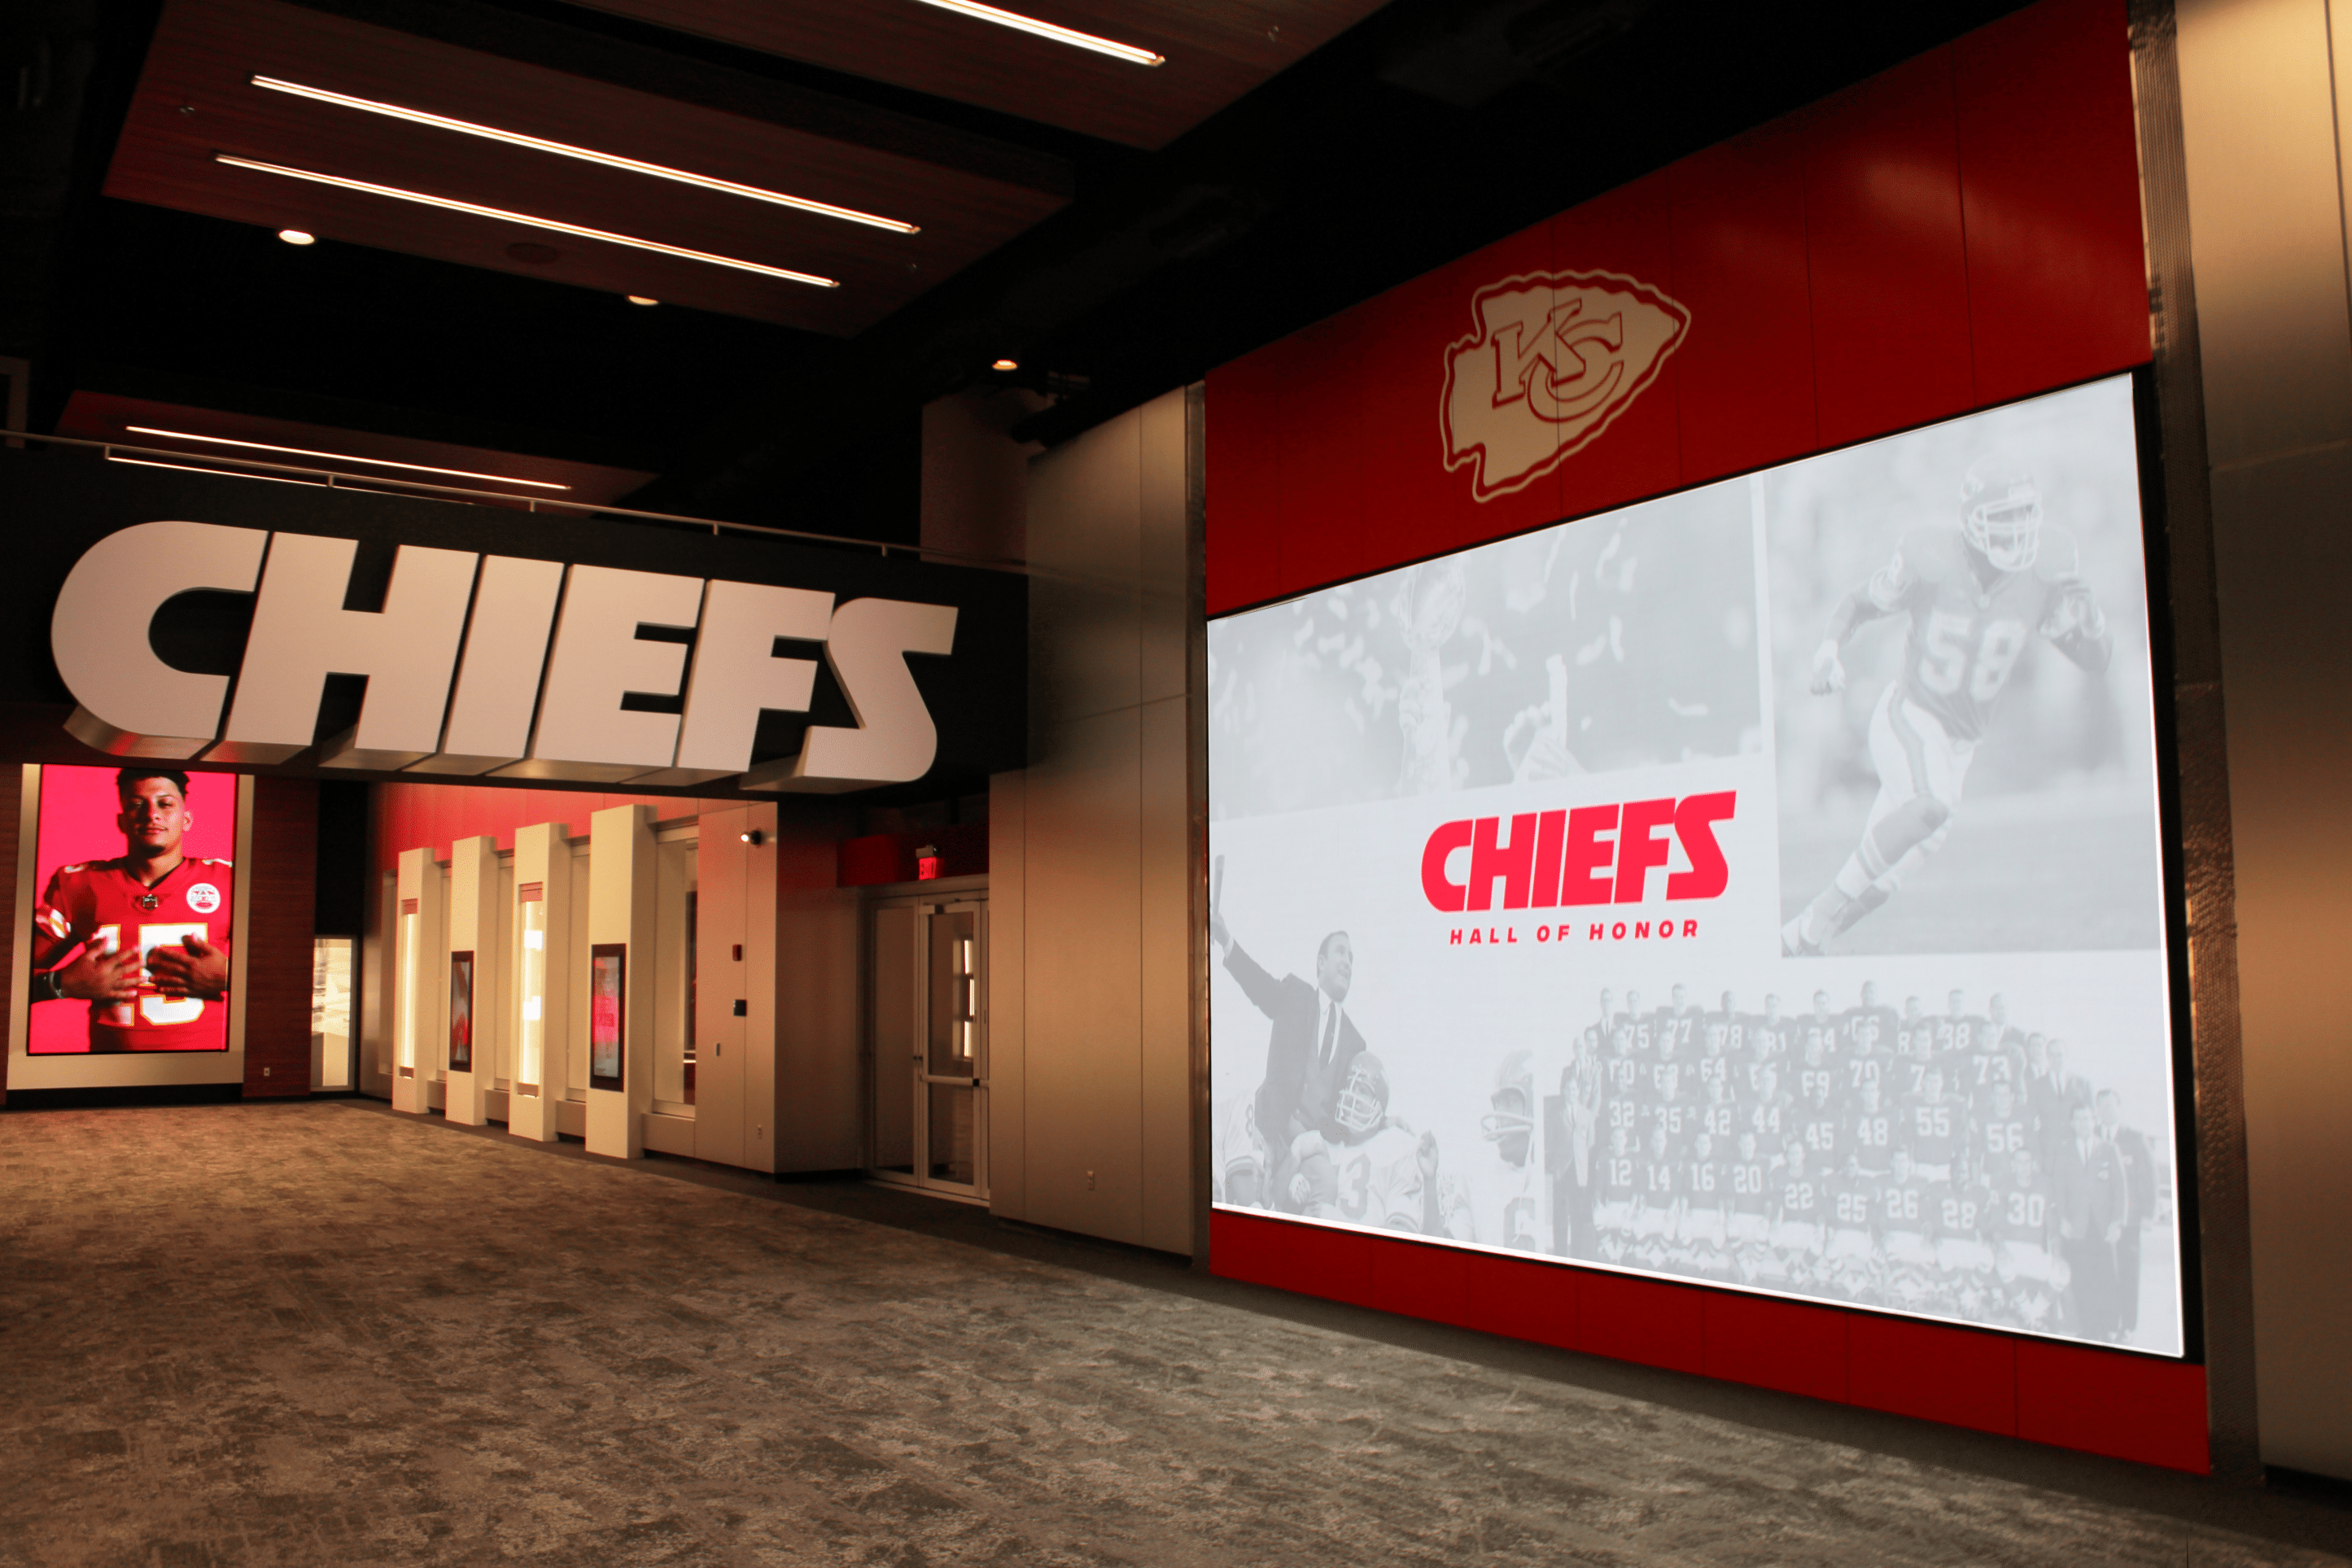 Large video wall with Kansas City Chiefs Hall of Honor logo and visuals